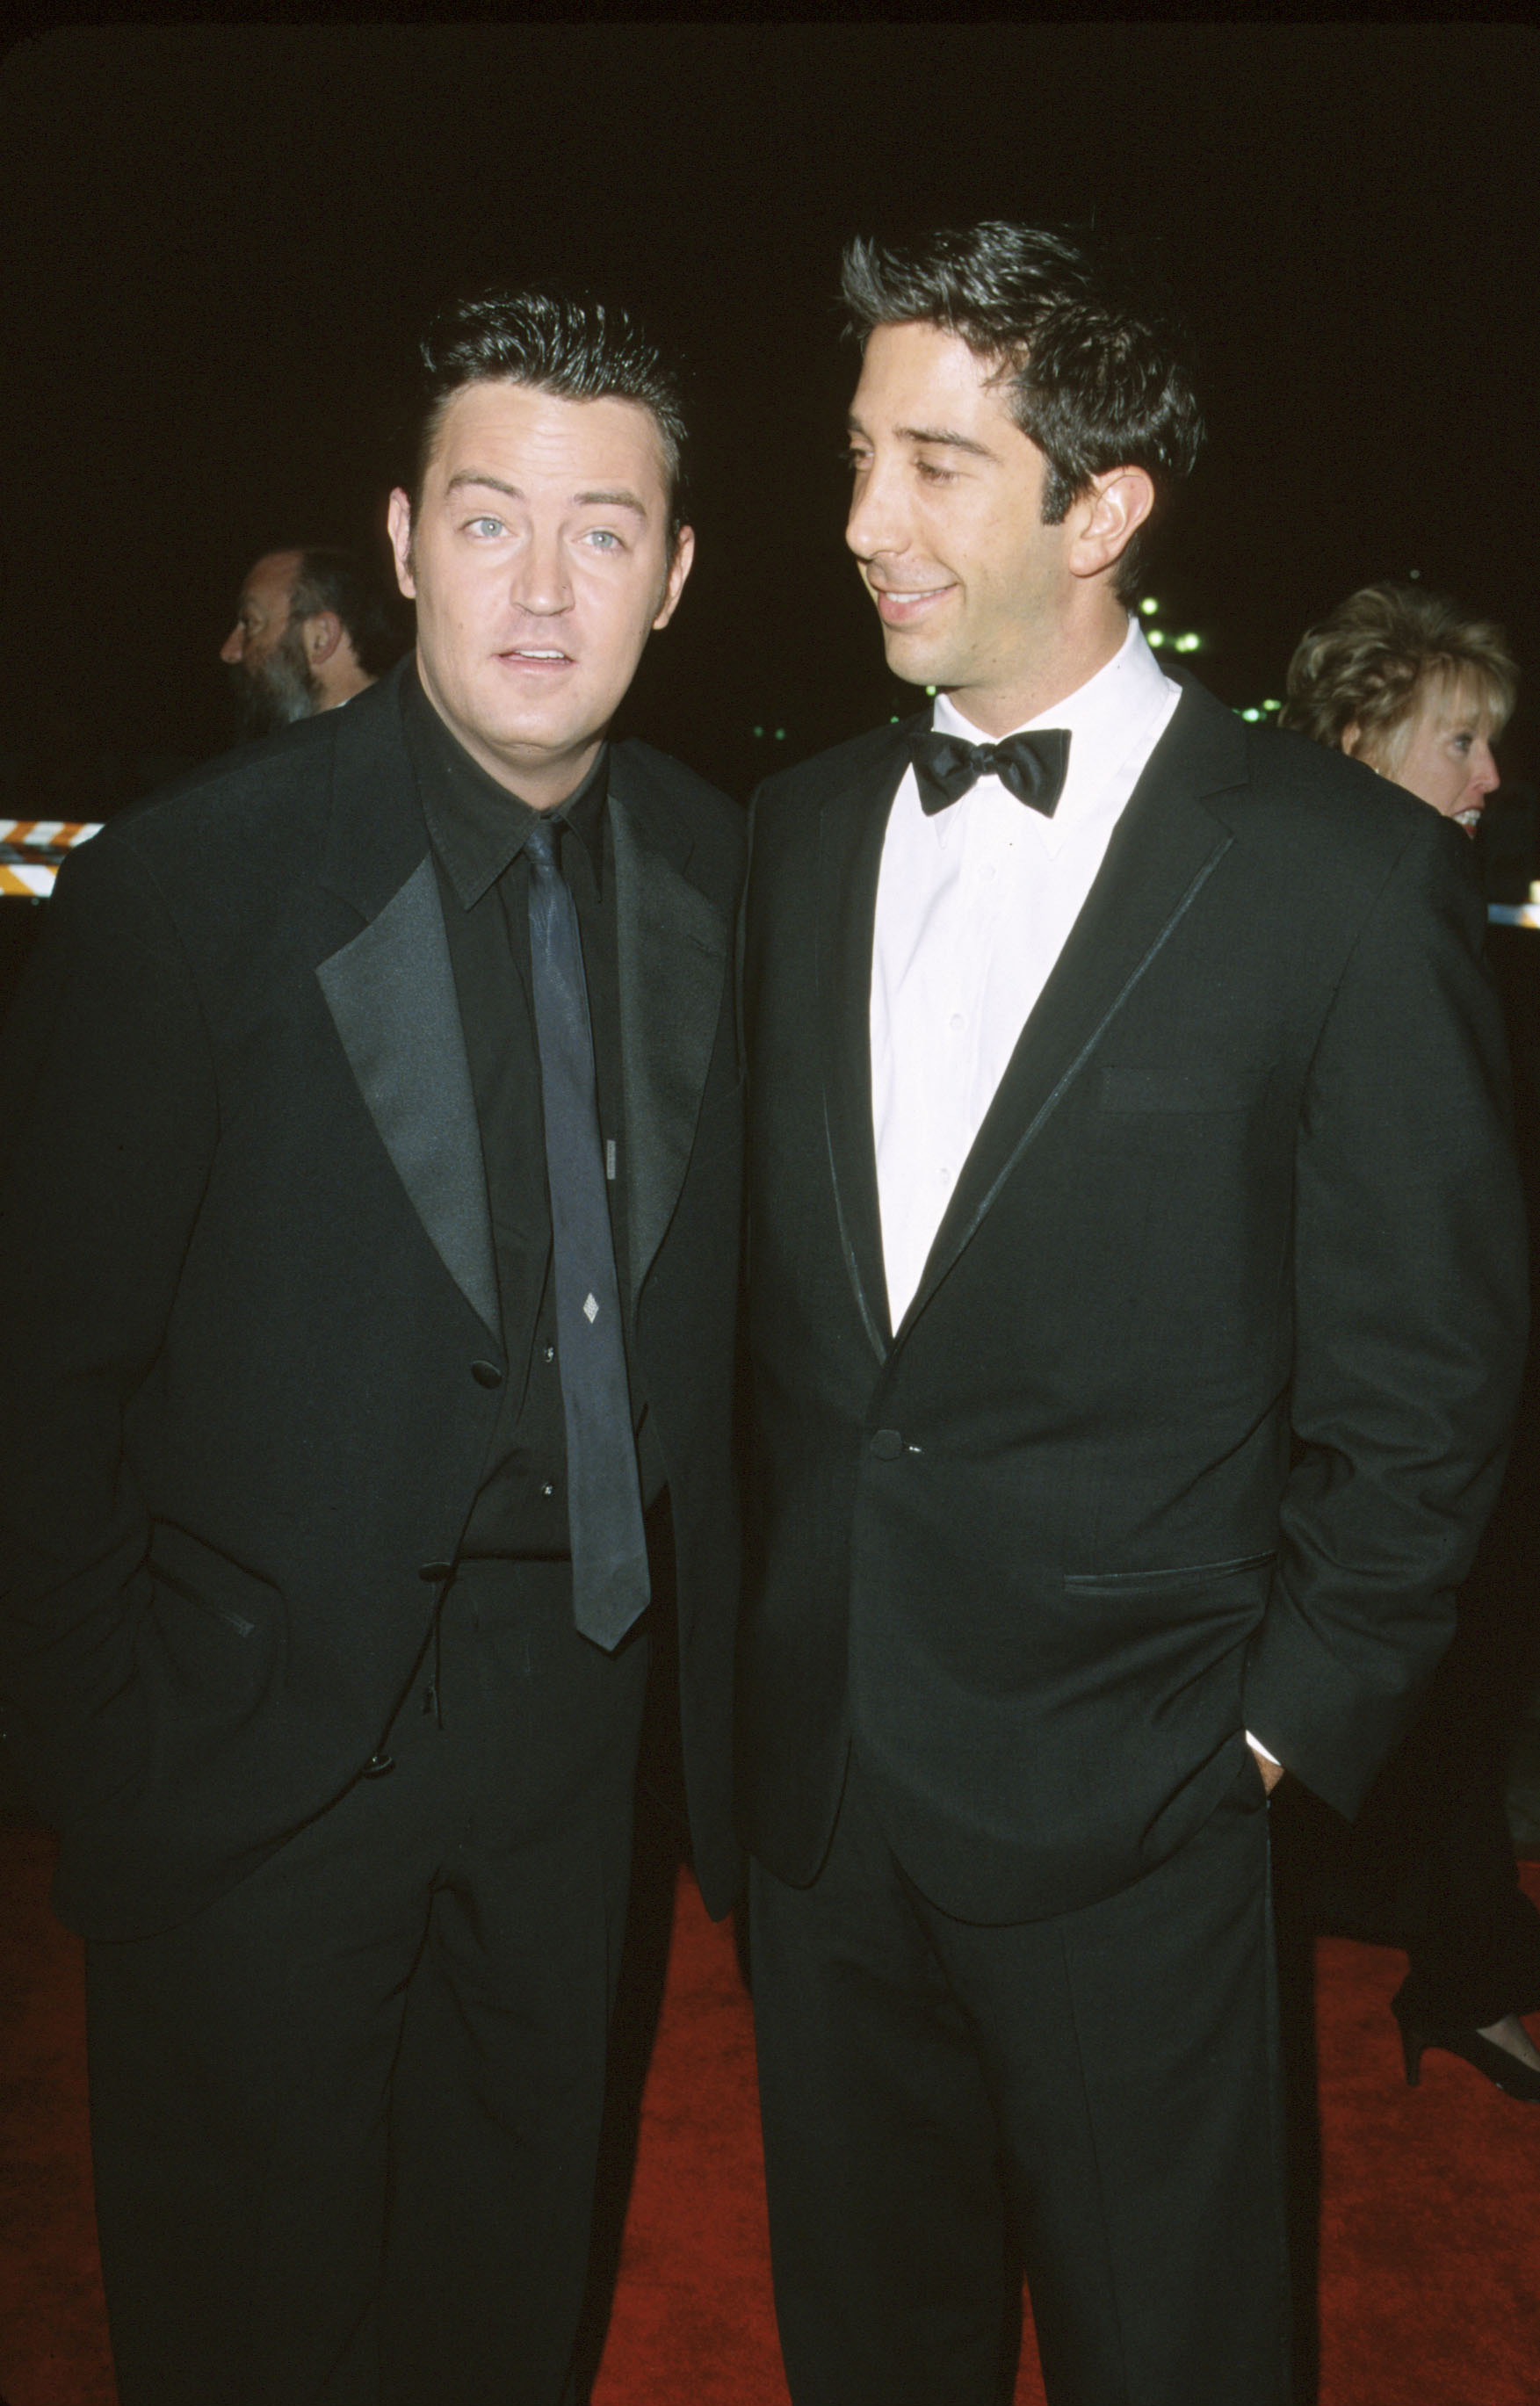 Matthew Perry and David Schwimmer at the 26th Annual People's Choice Award in Pasadena, California in 2000 | Source: Getty Images